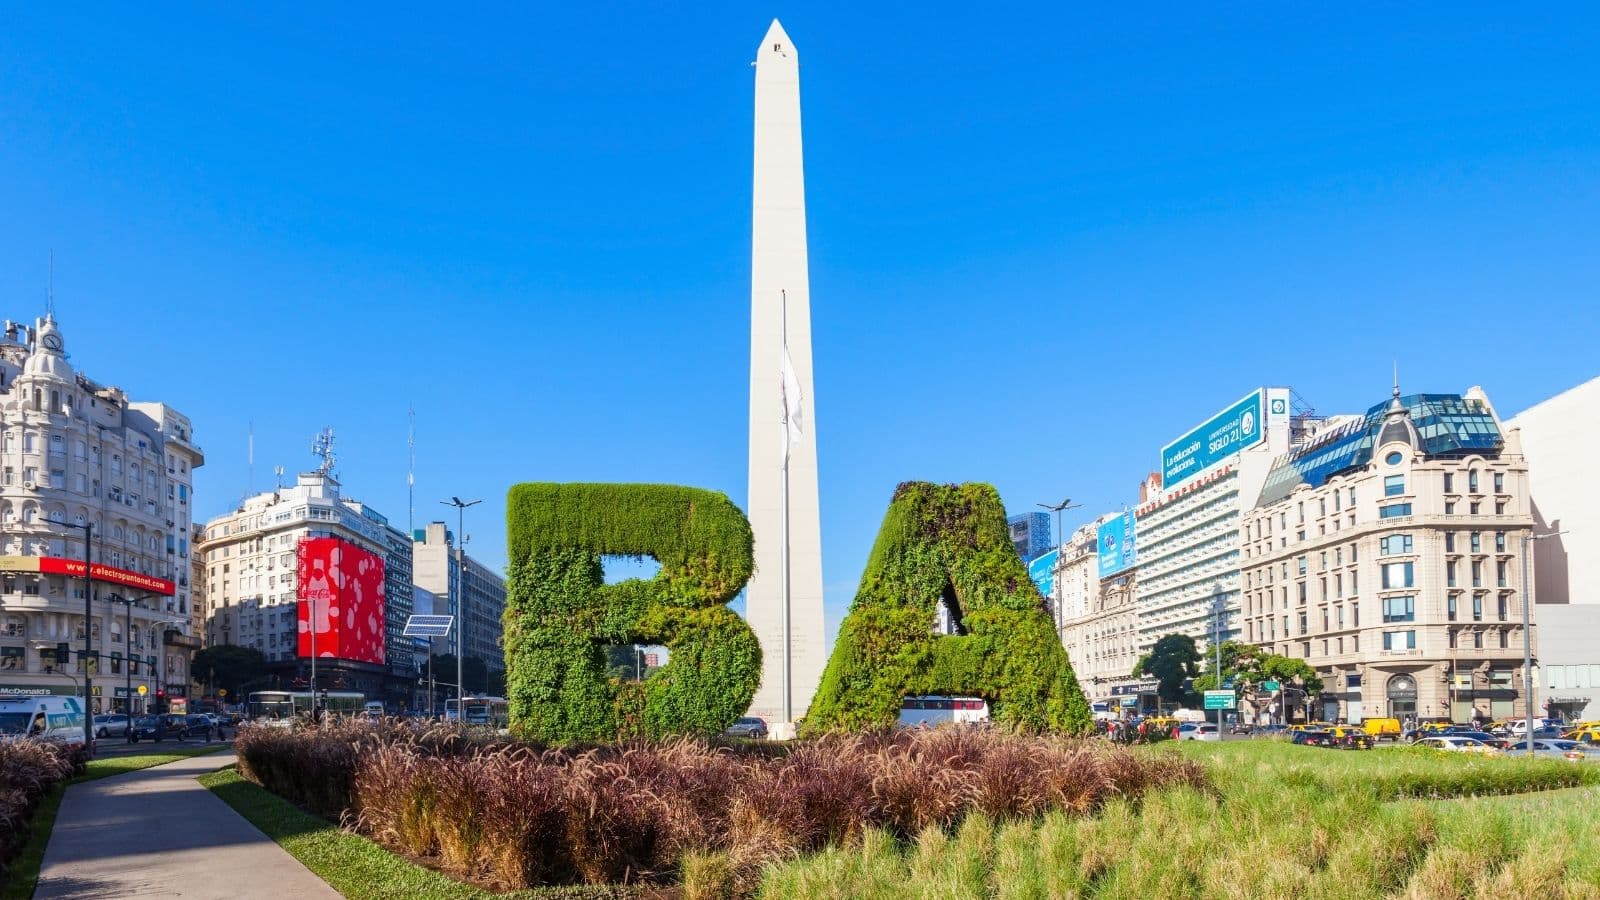 Top 5 Monuments You Need to Visit in Argentina